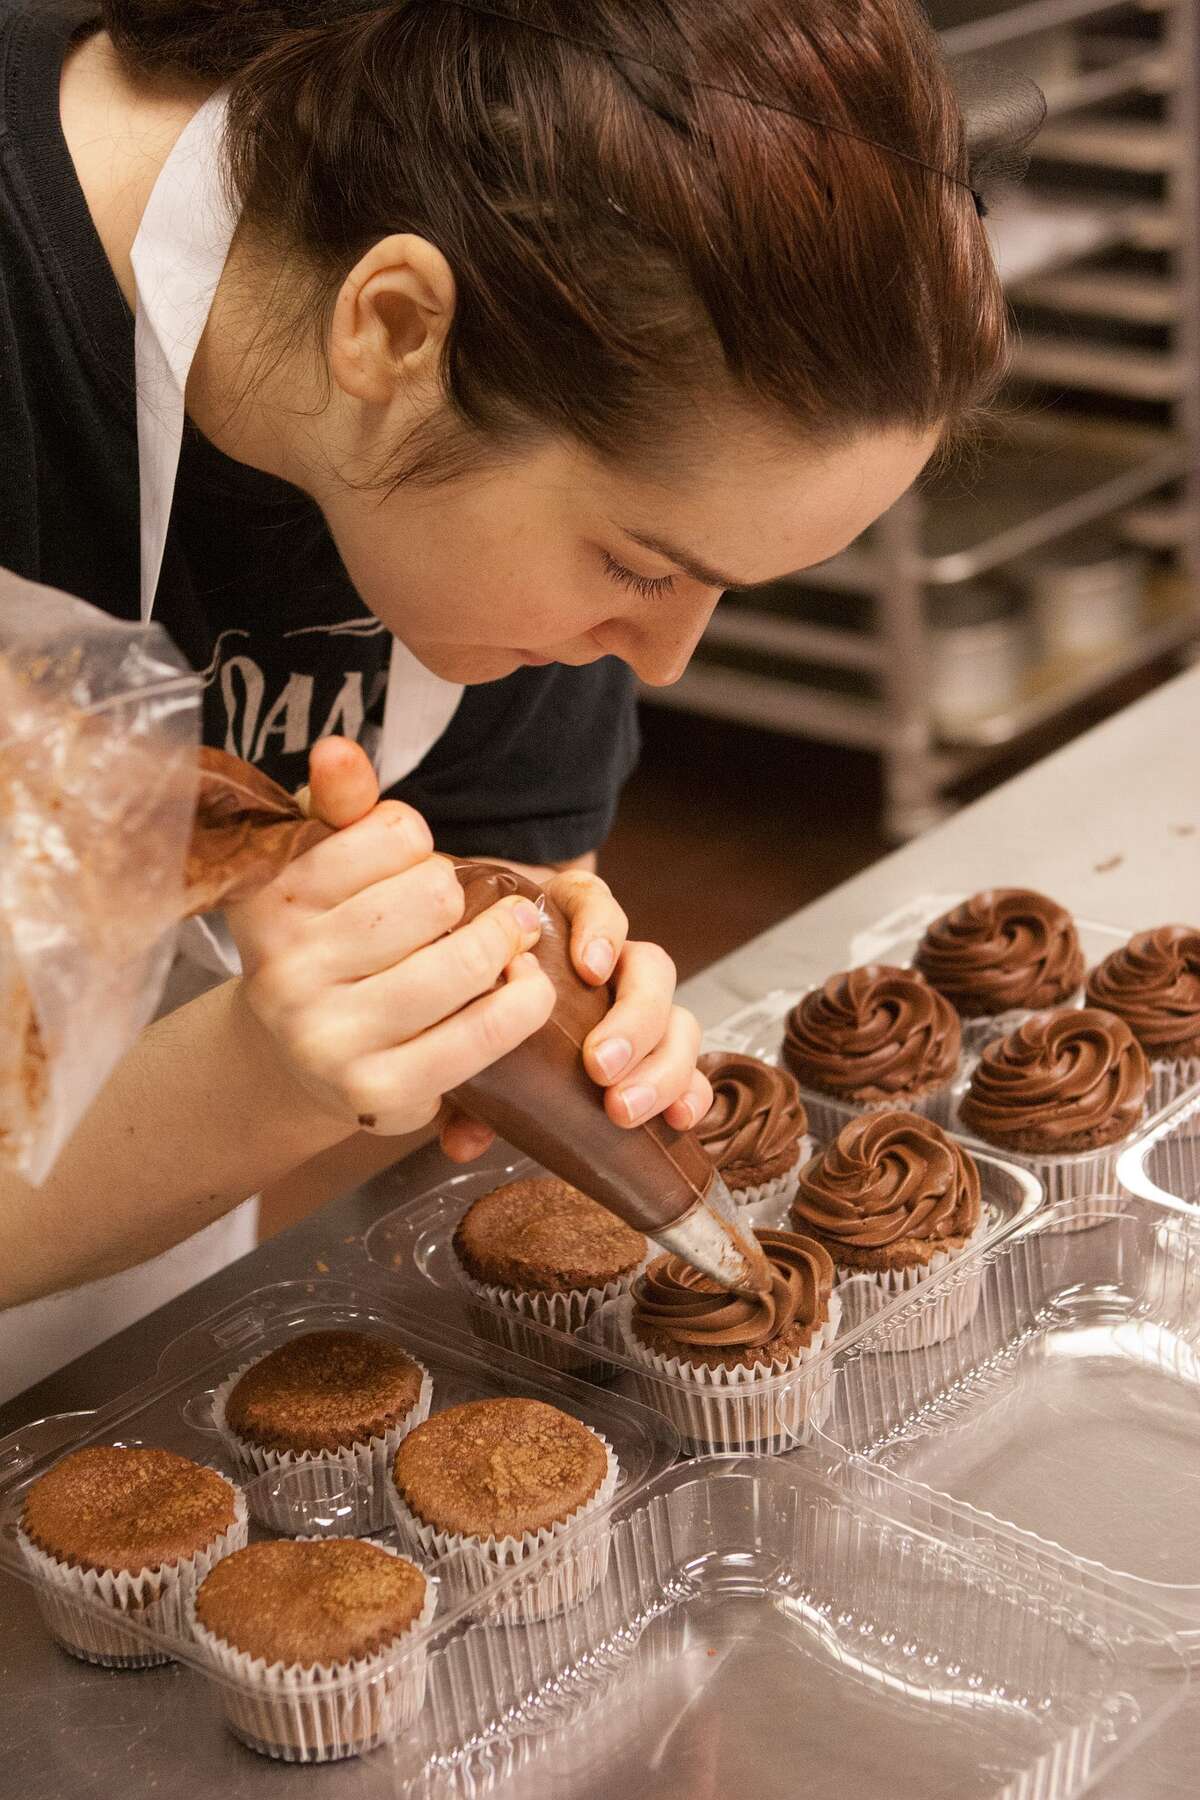 Randi Markowitz has gone from being one woman experimenting with gluten-free flours and a mixer to the owner of a successful wholesale and retail bakery, Gluten Free Nation.